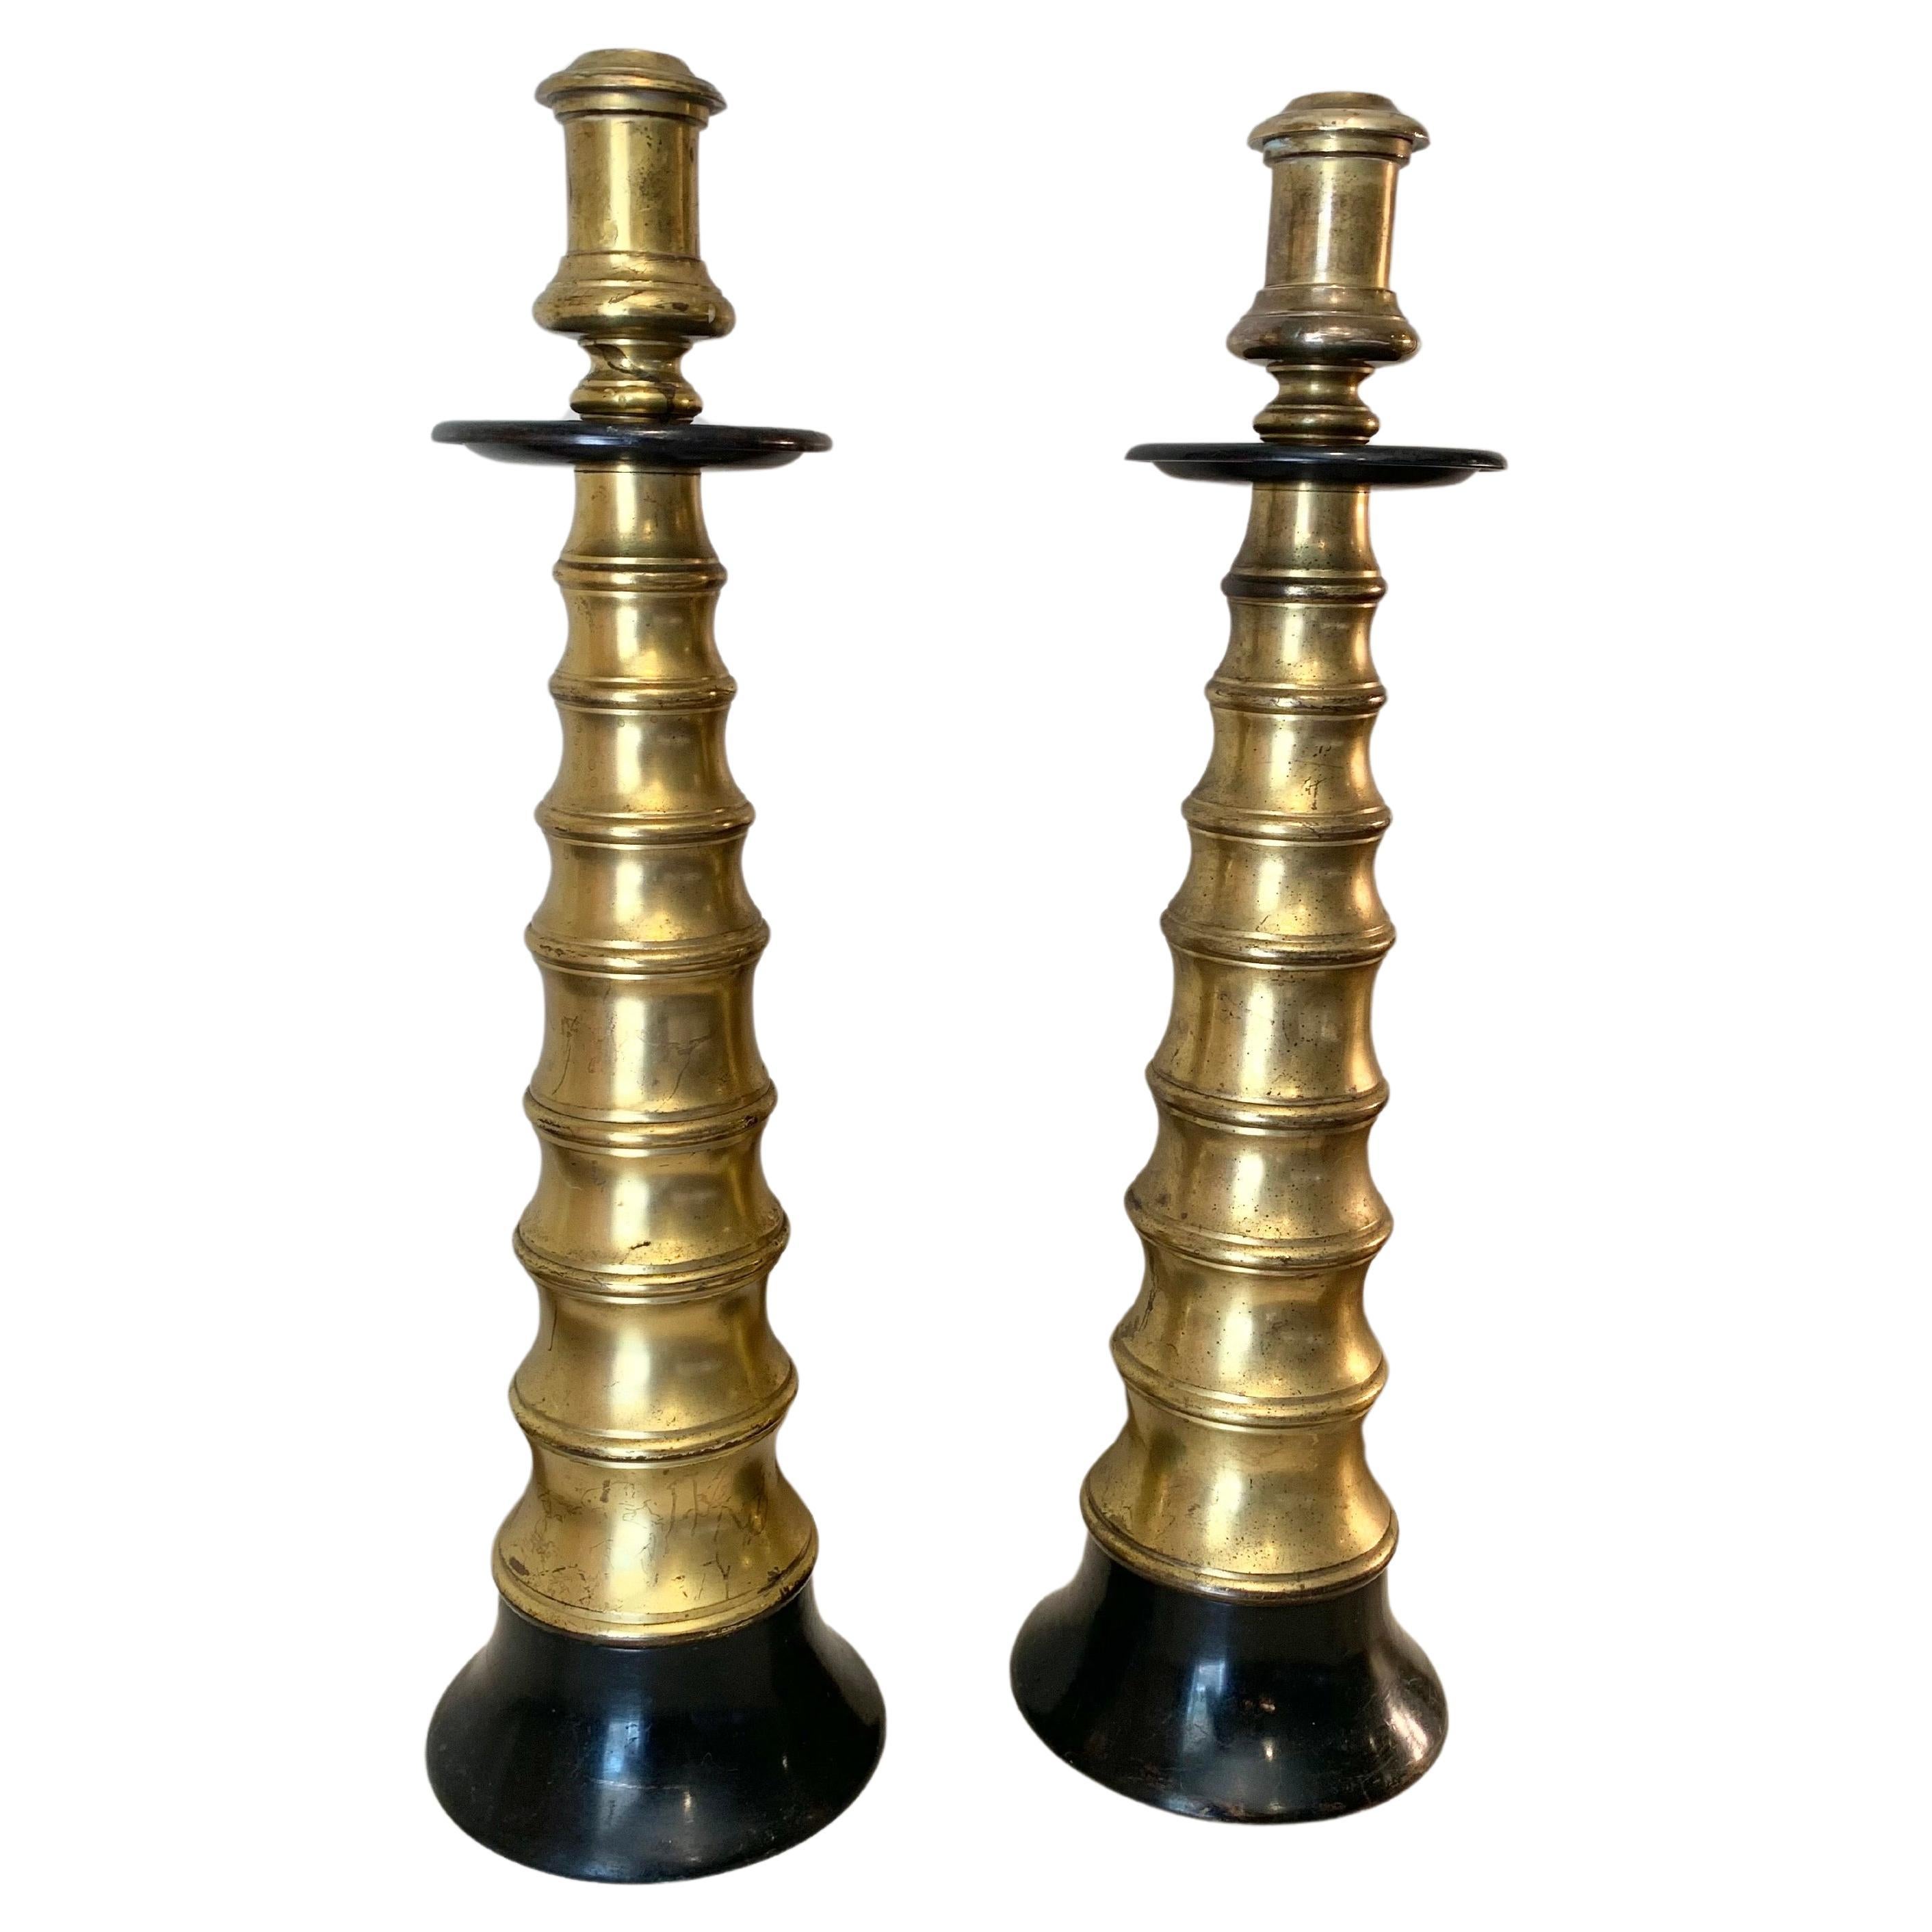 Mid 20th Century Brass and Ebonized Candle Holders - a Pair For Sale